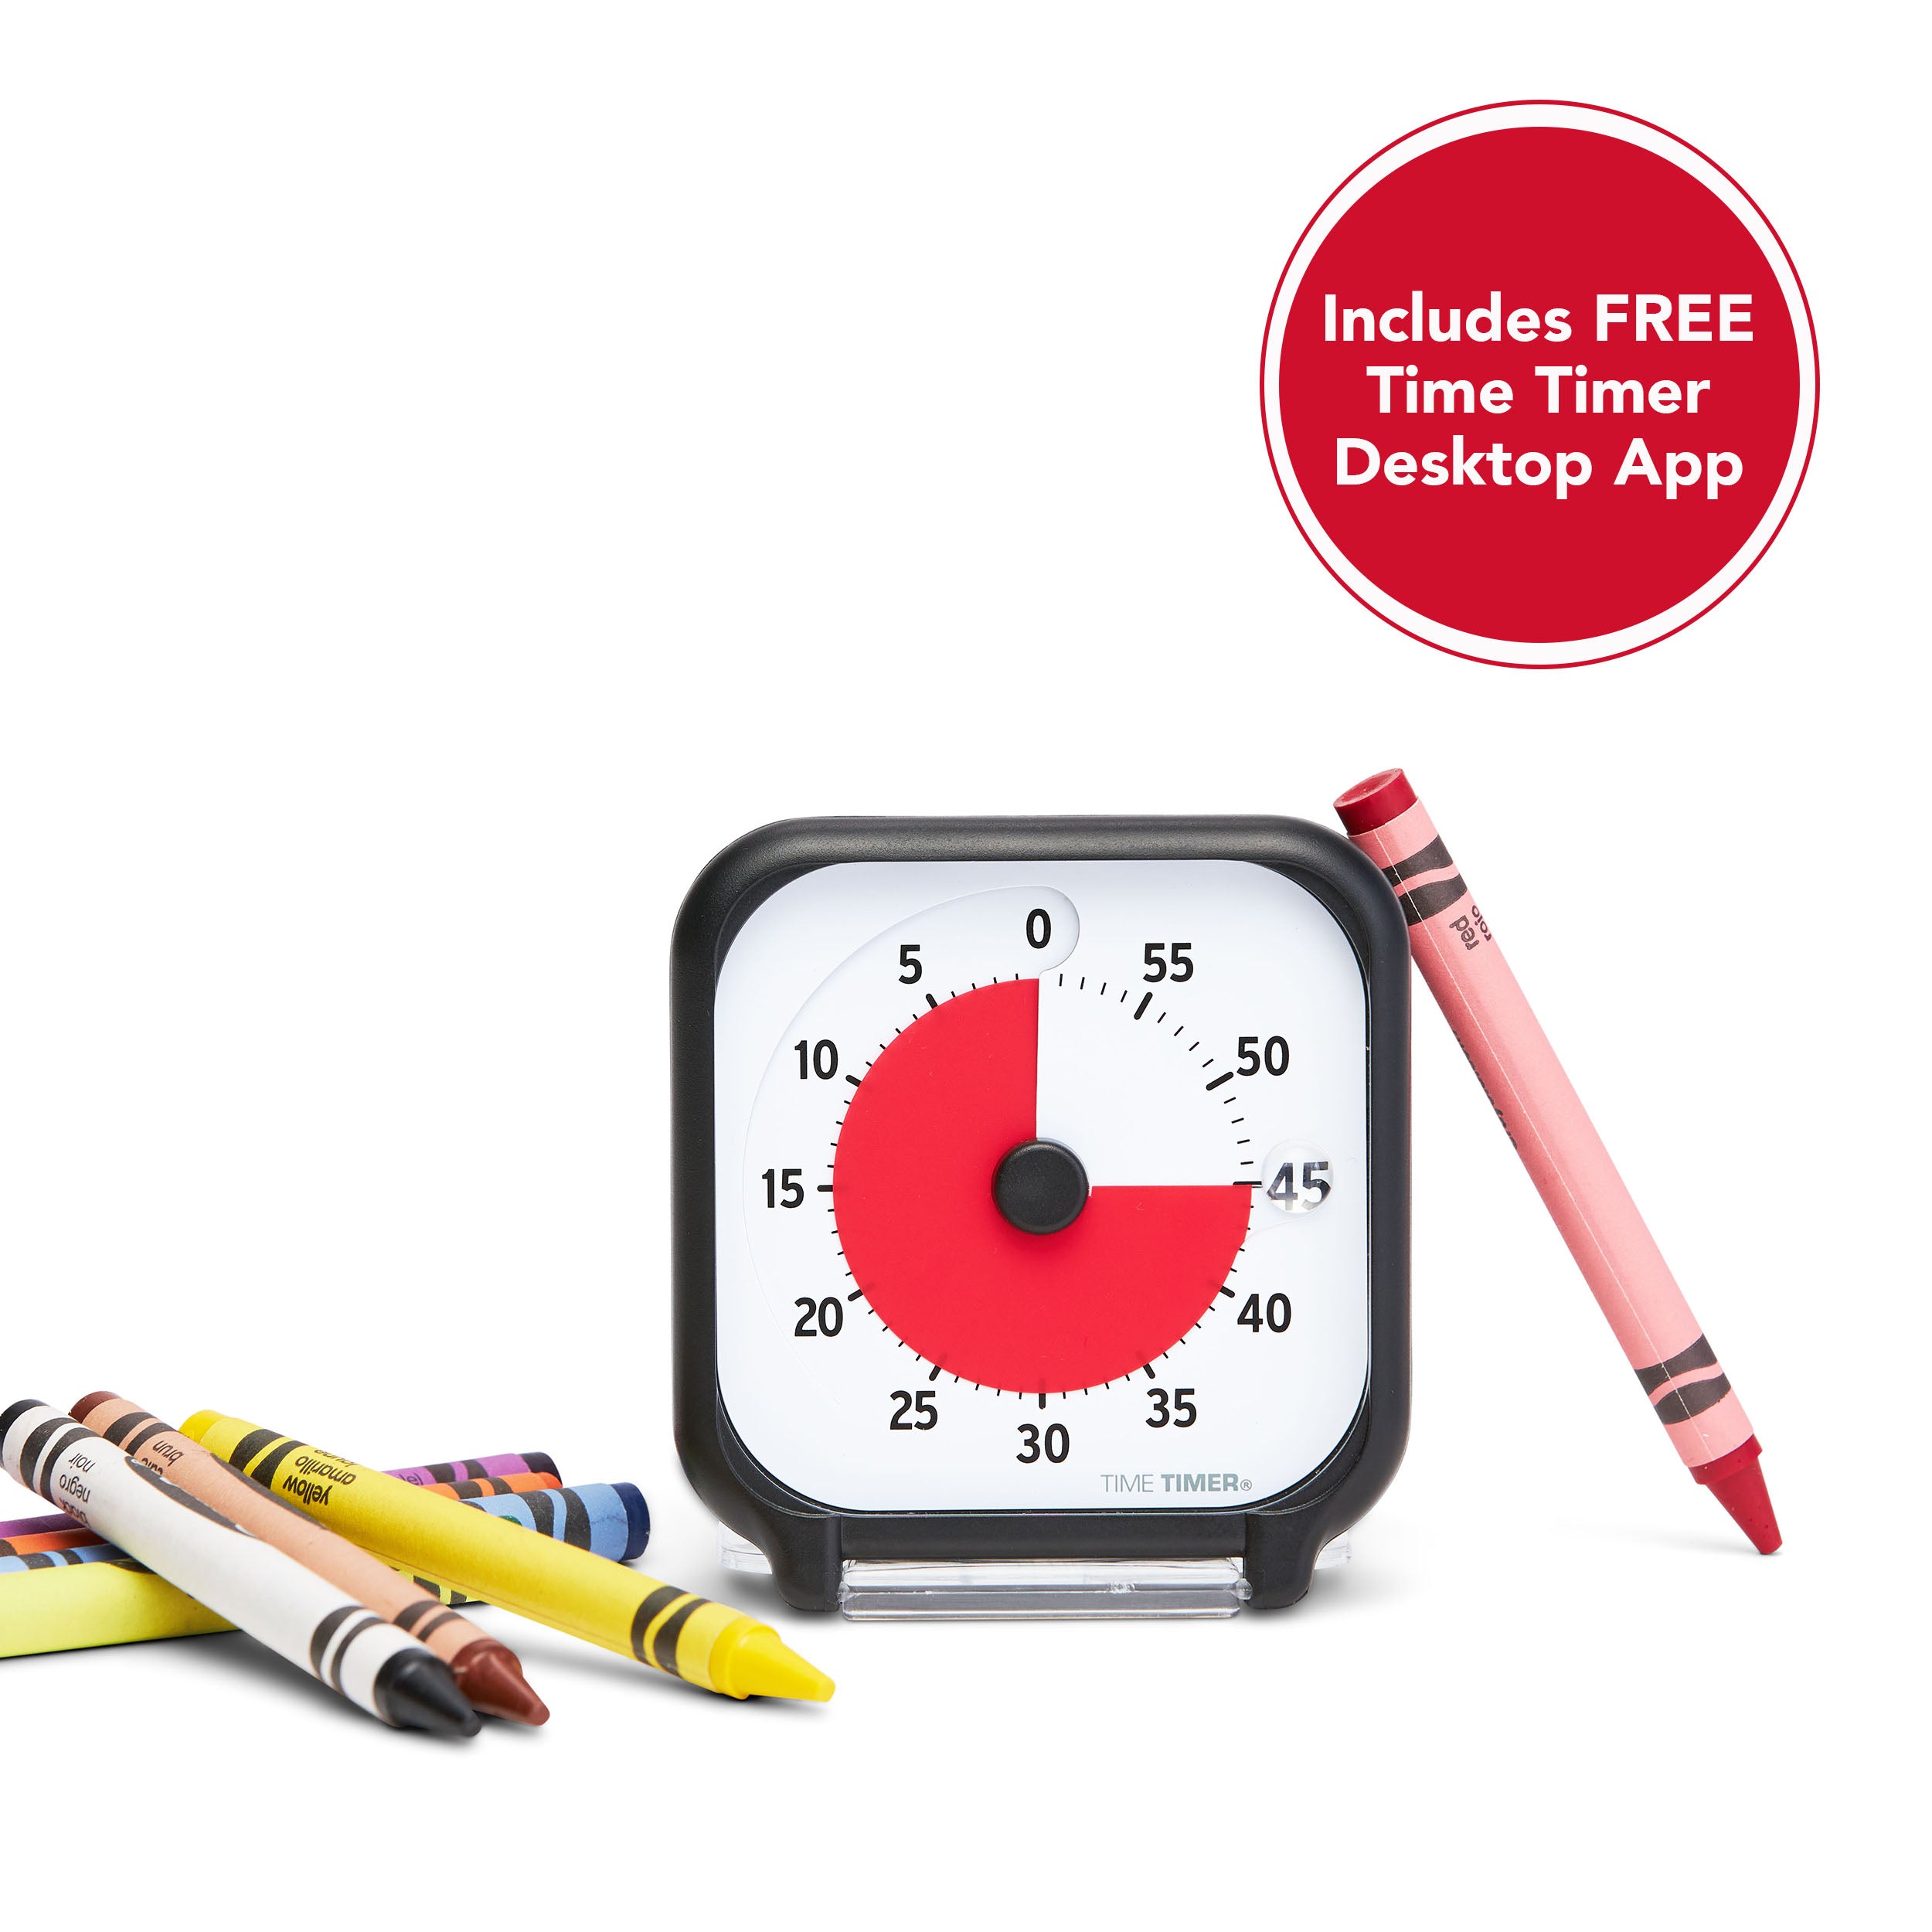 The 8 best timers for the office on